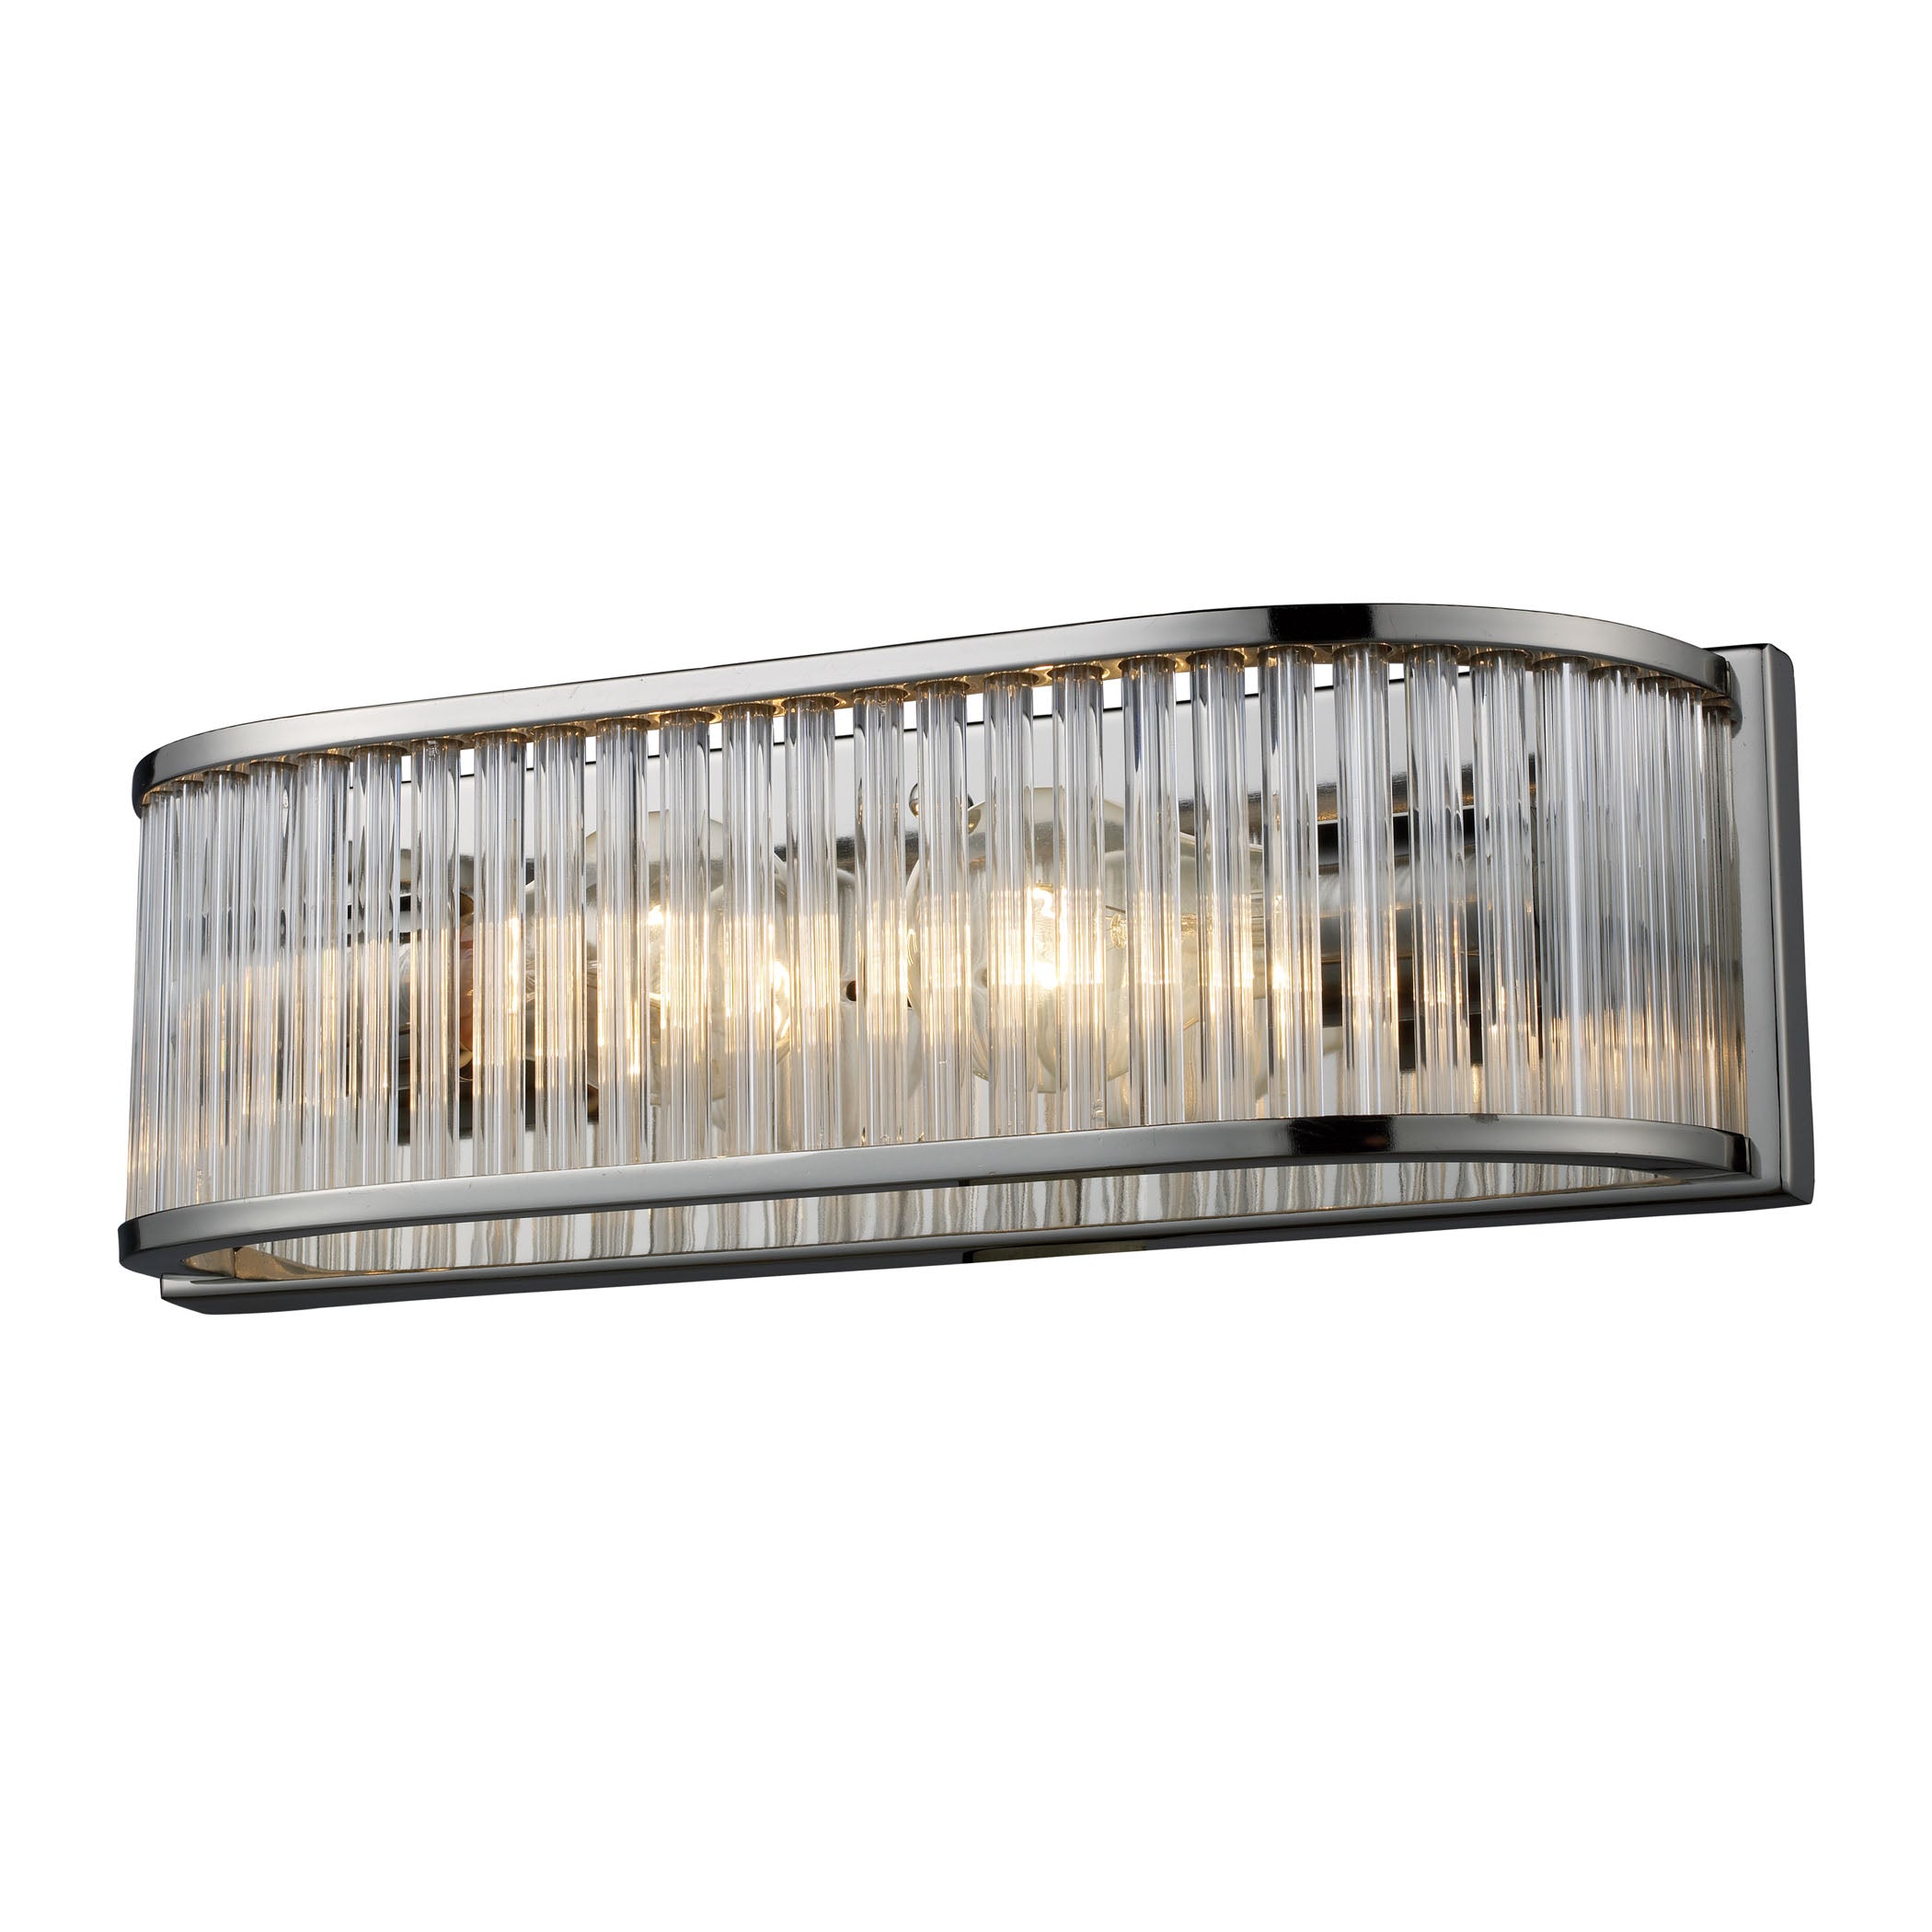 ELK Lighting 10126/2 Braxton 2-Light Vanity Sconce in Polished Nickel with Ribbed Glass